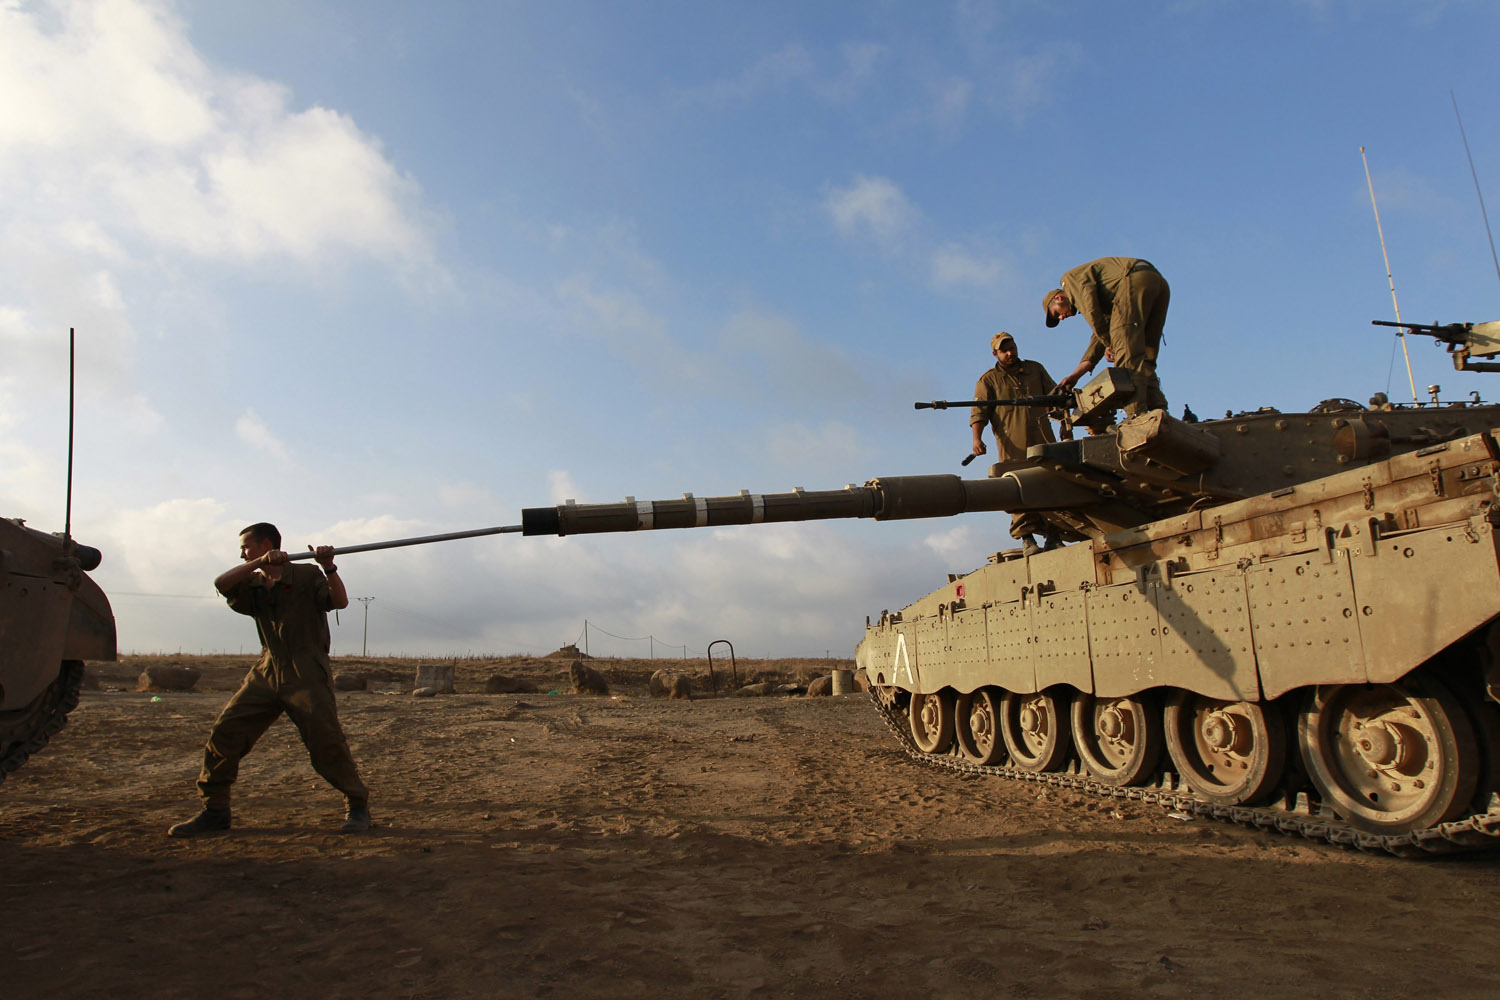 July 17, 2013. An Israeli soldier cleans the barrel of a tank near the border with Syria in the Israeli-occupied Golan Heights.